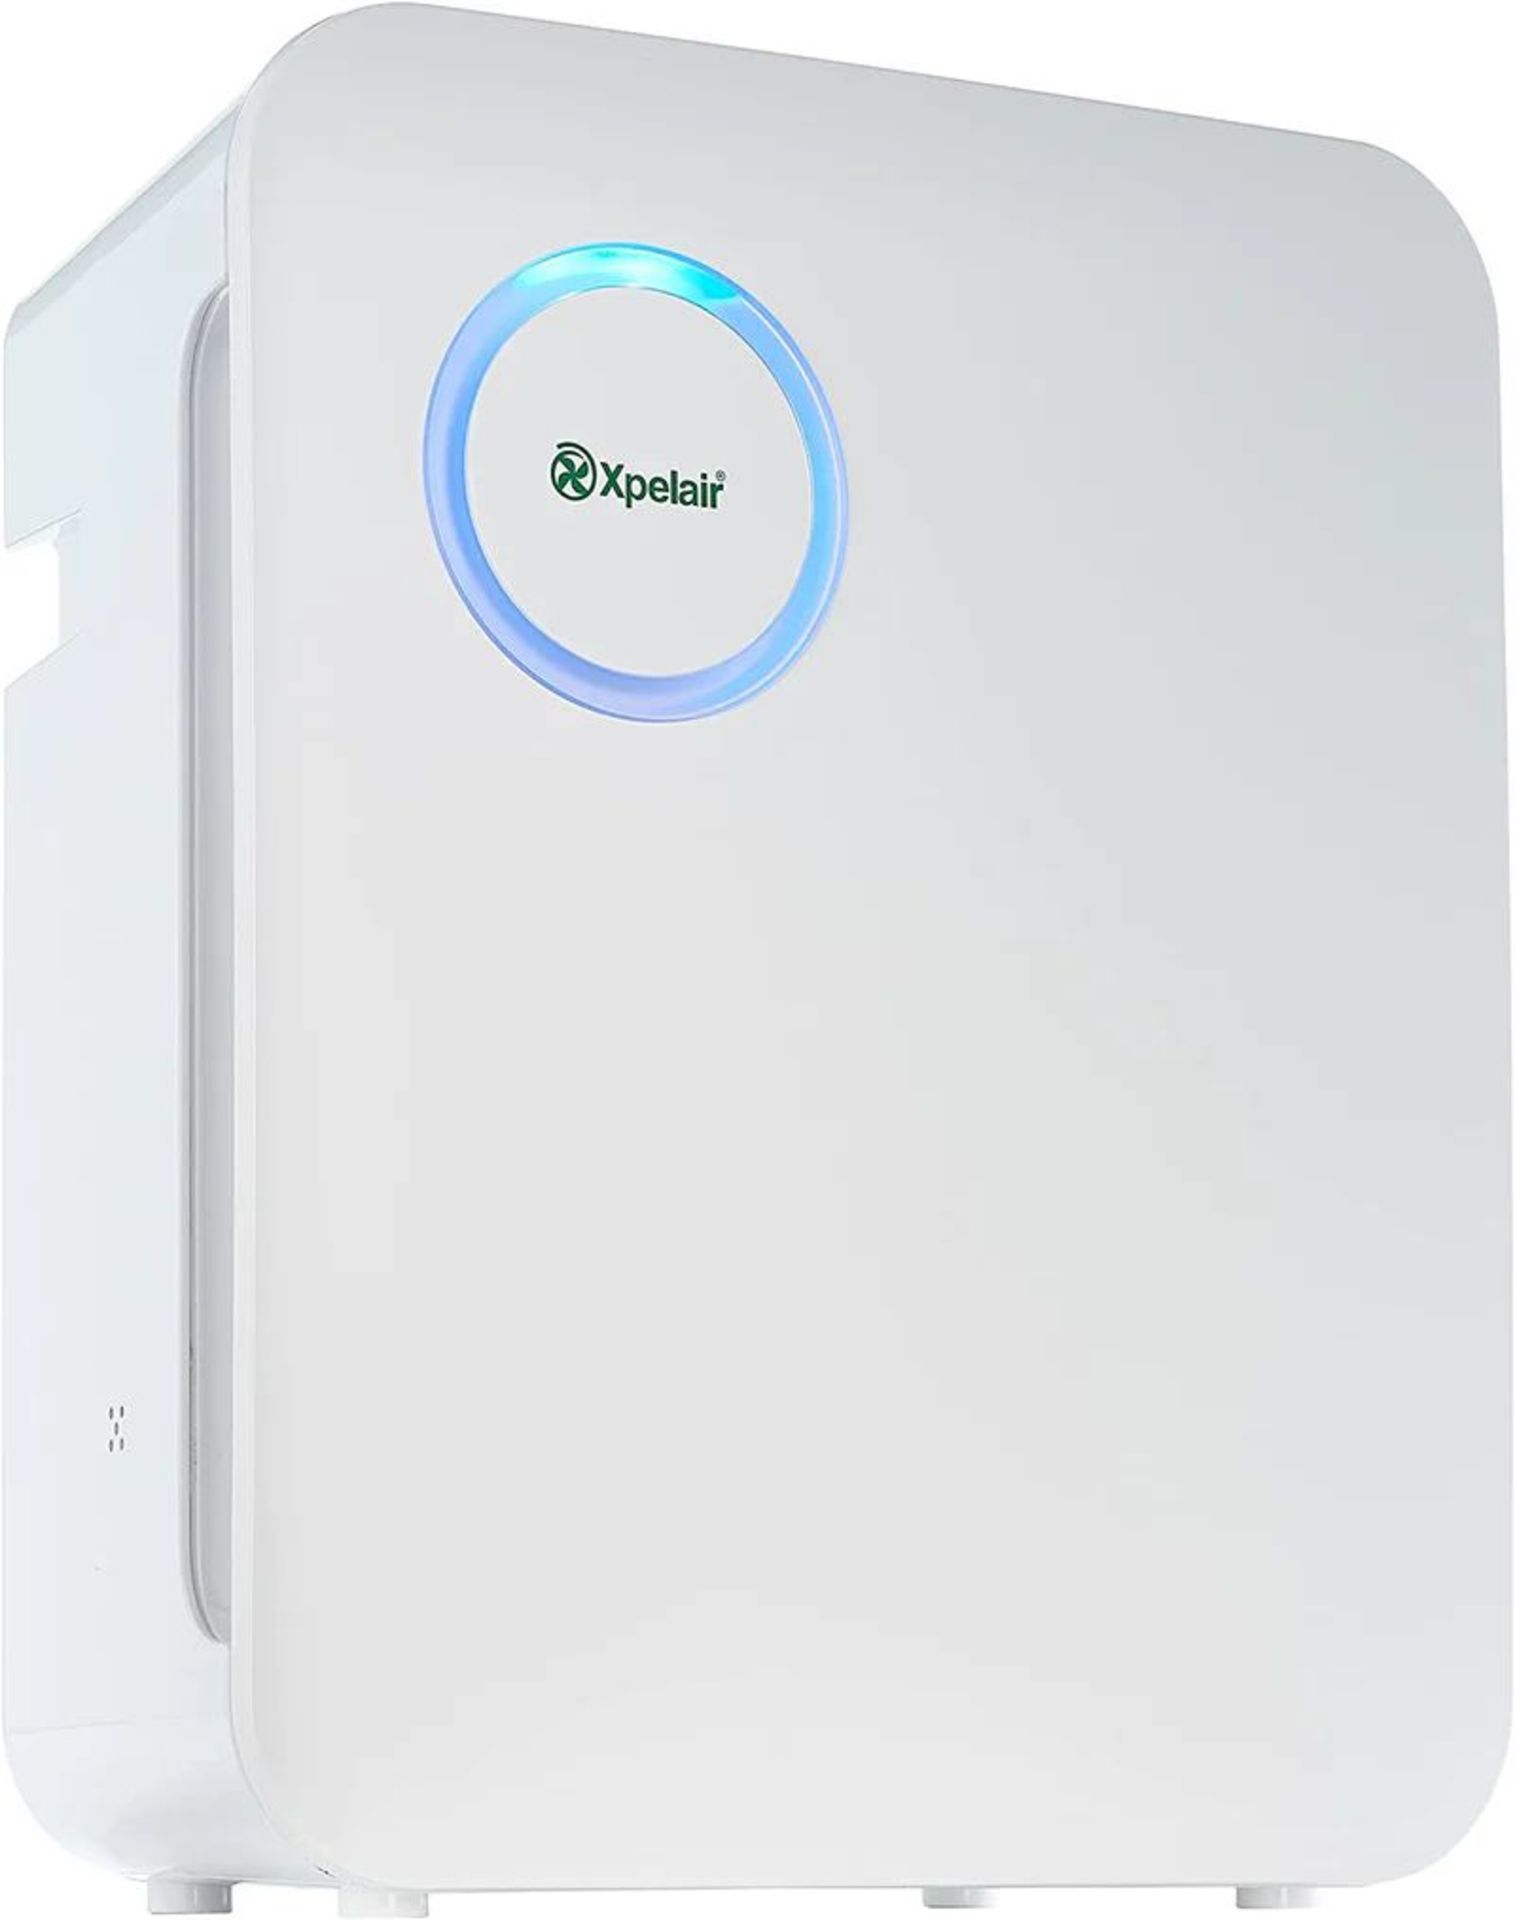 BRAND NEW EXPELAIR PURE LIFE HEPA INFANT SILENT AIR PURIFIER WITH TIMER RRP £149 R18.5